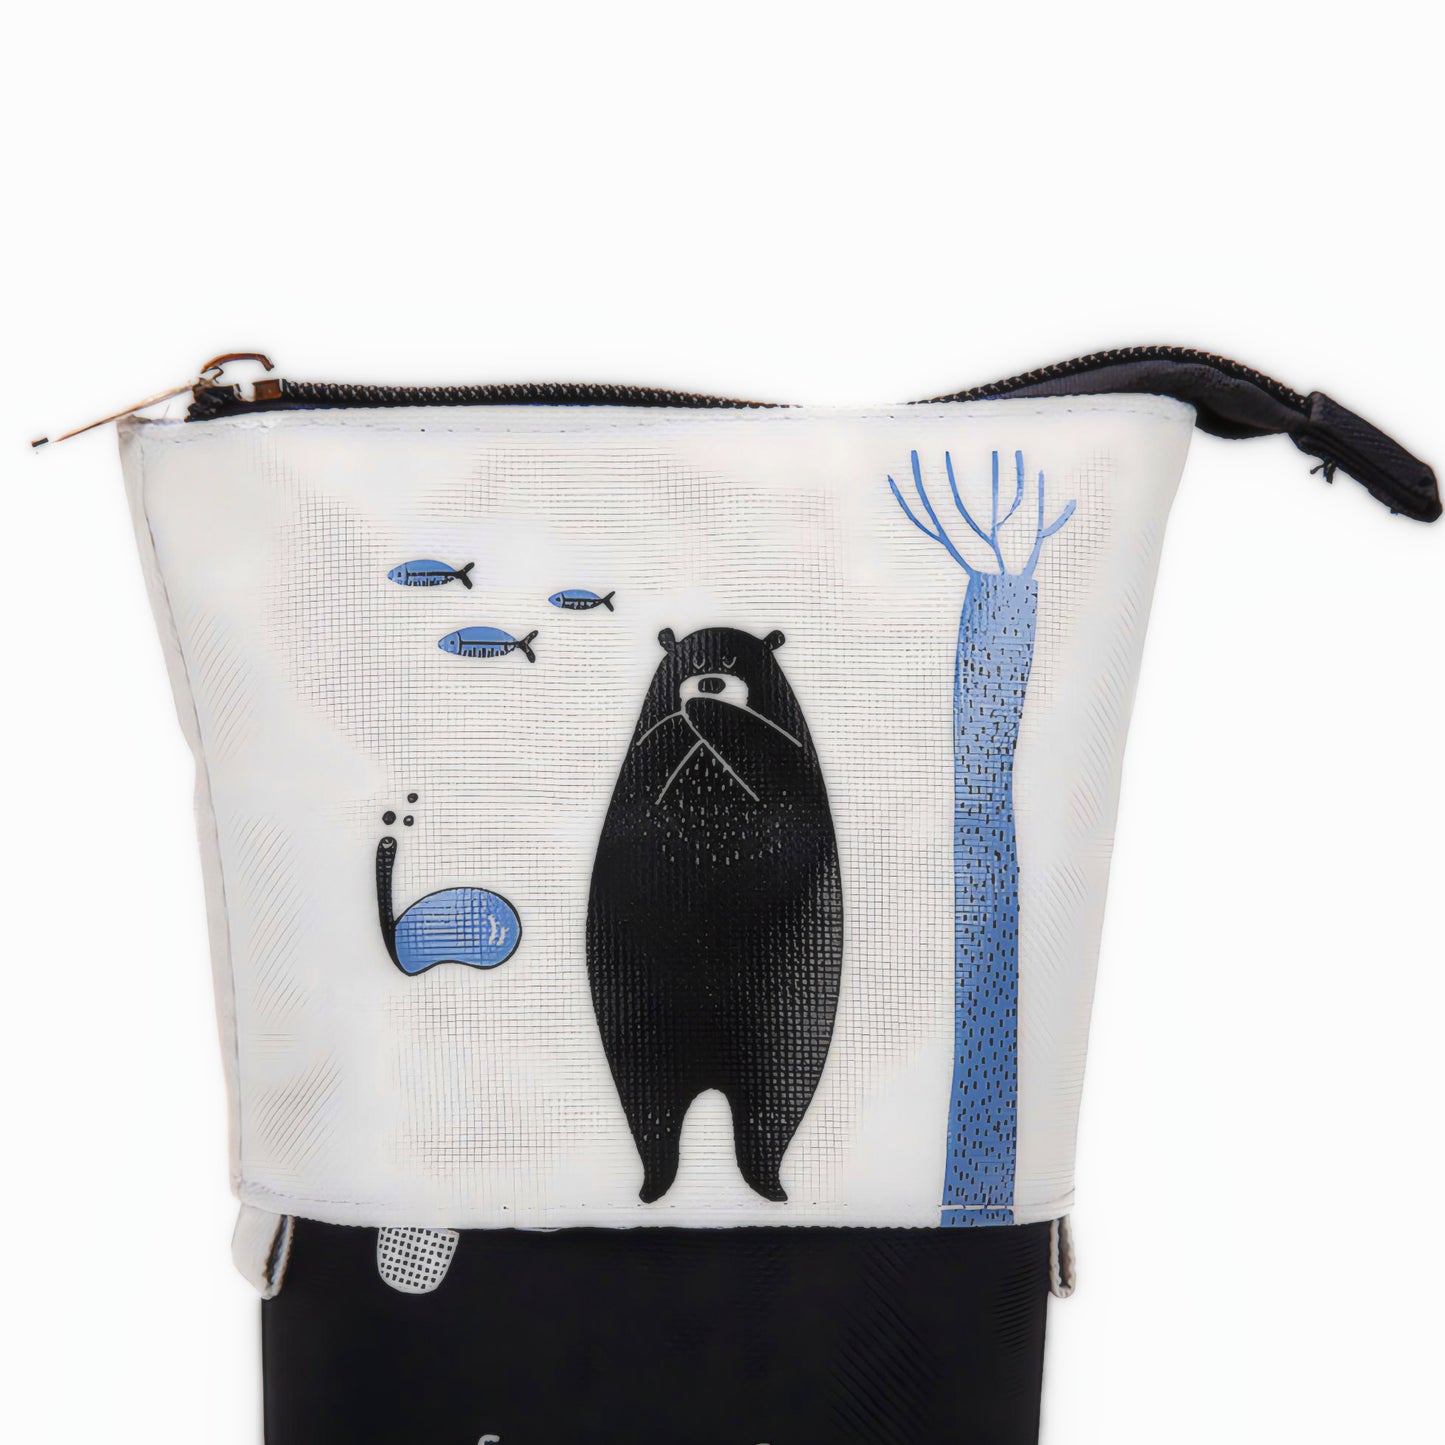 a retractable pencil case with a bear on it, white background